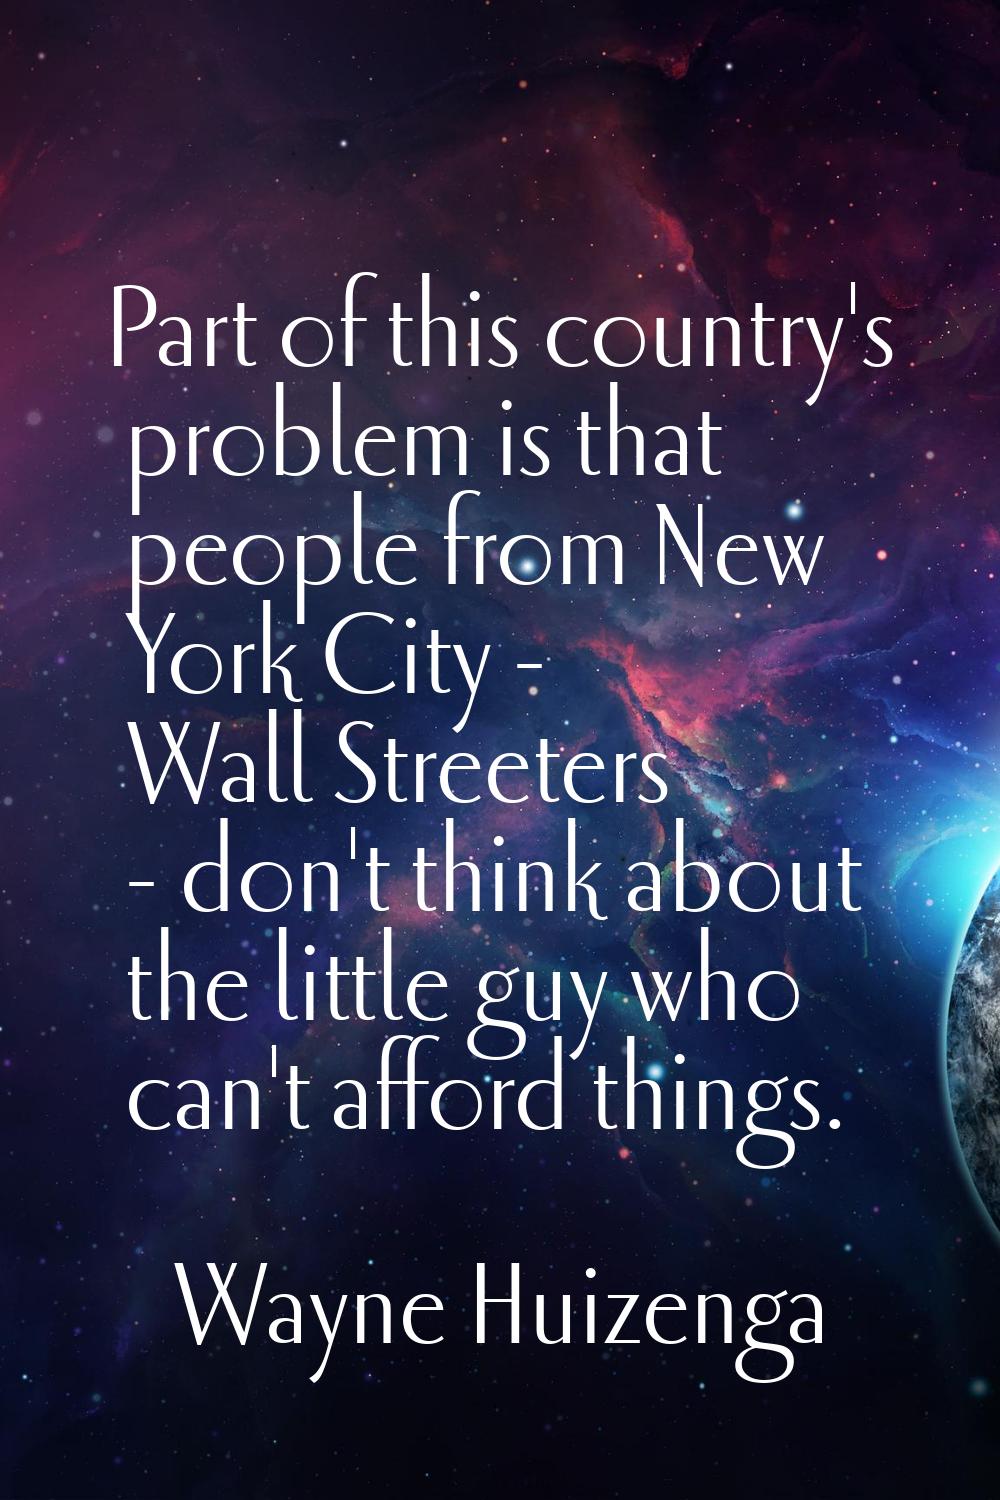 Part of this country's problem is that people from New York City - Wall Streeters - don't think abo